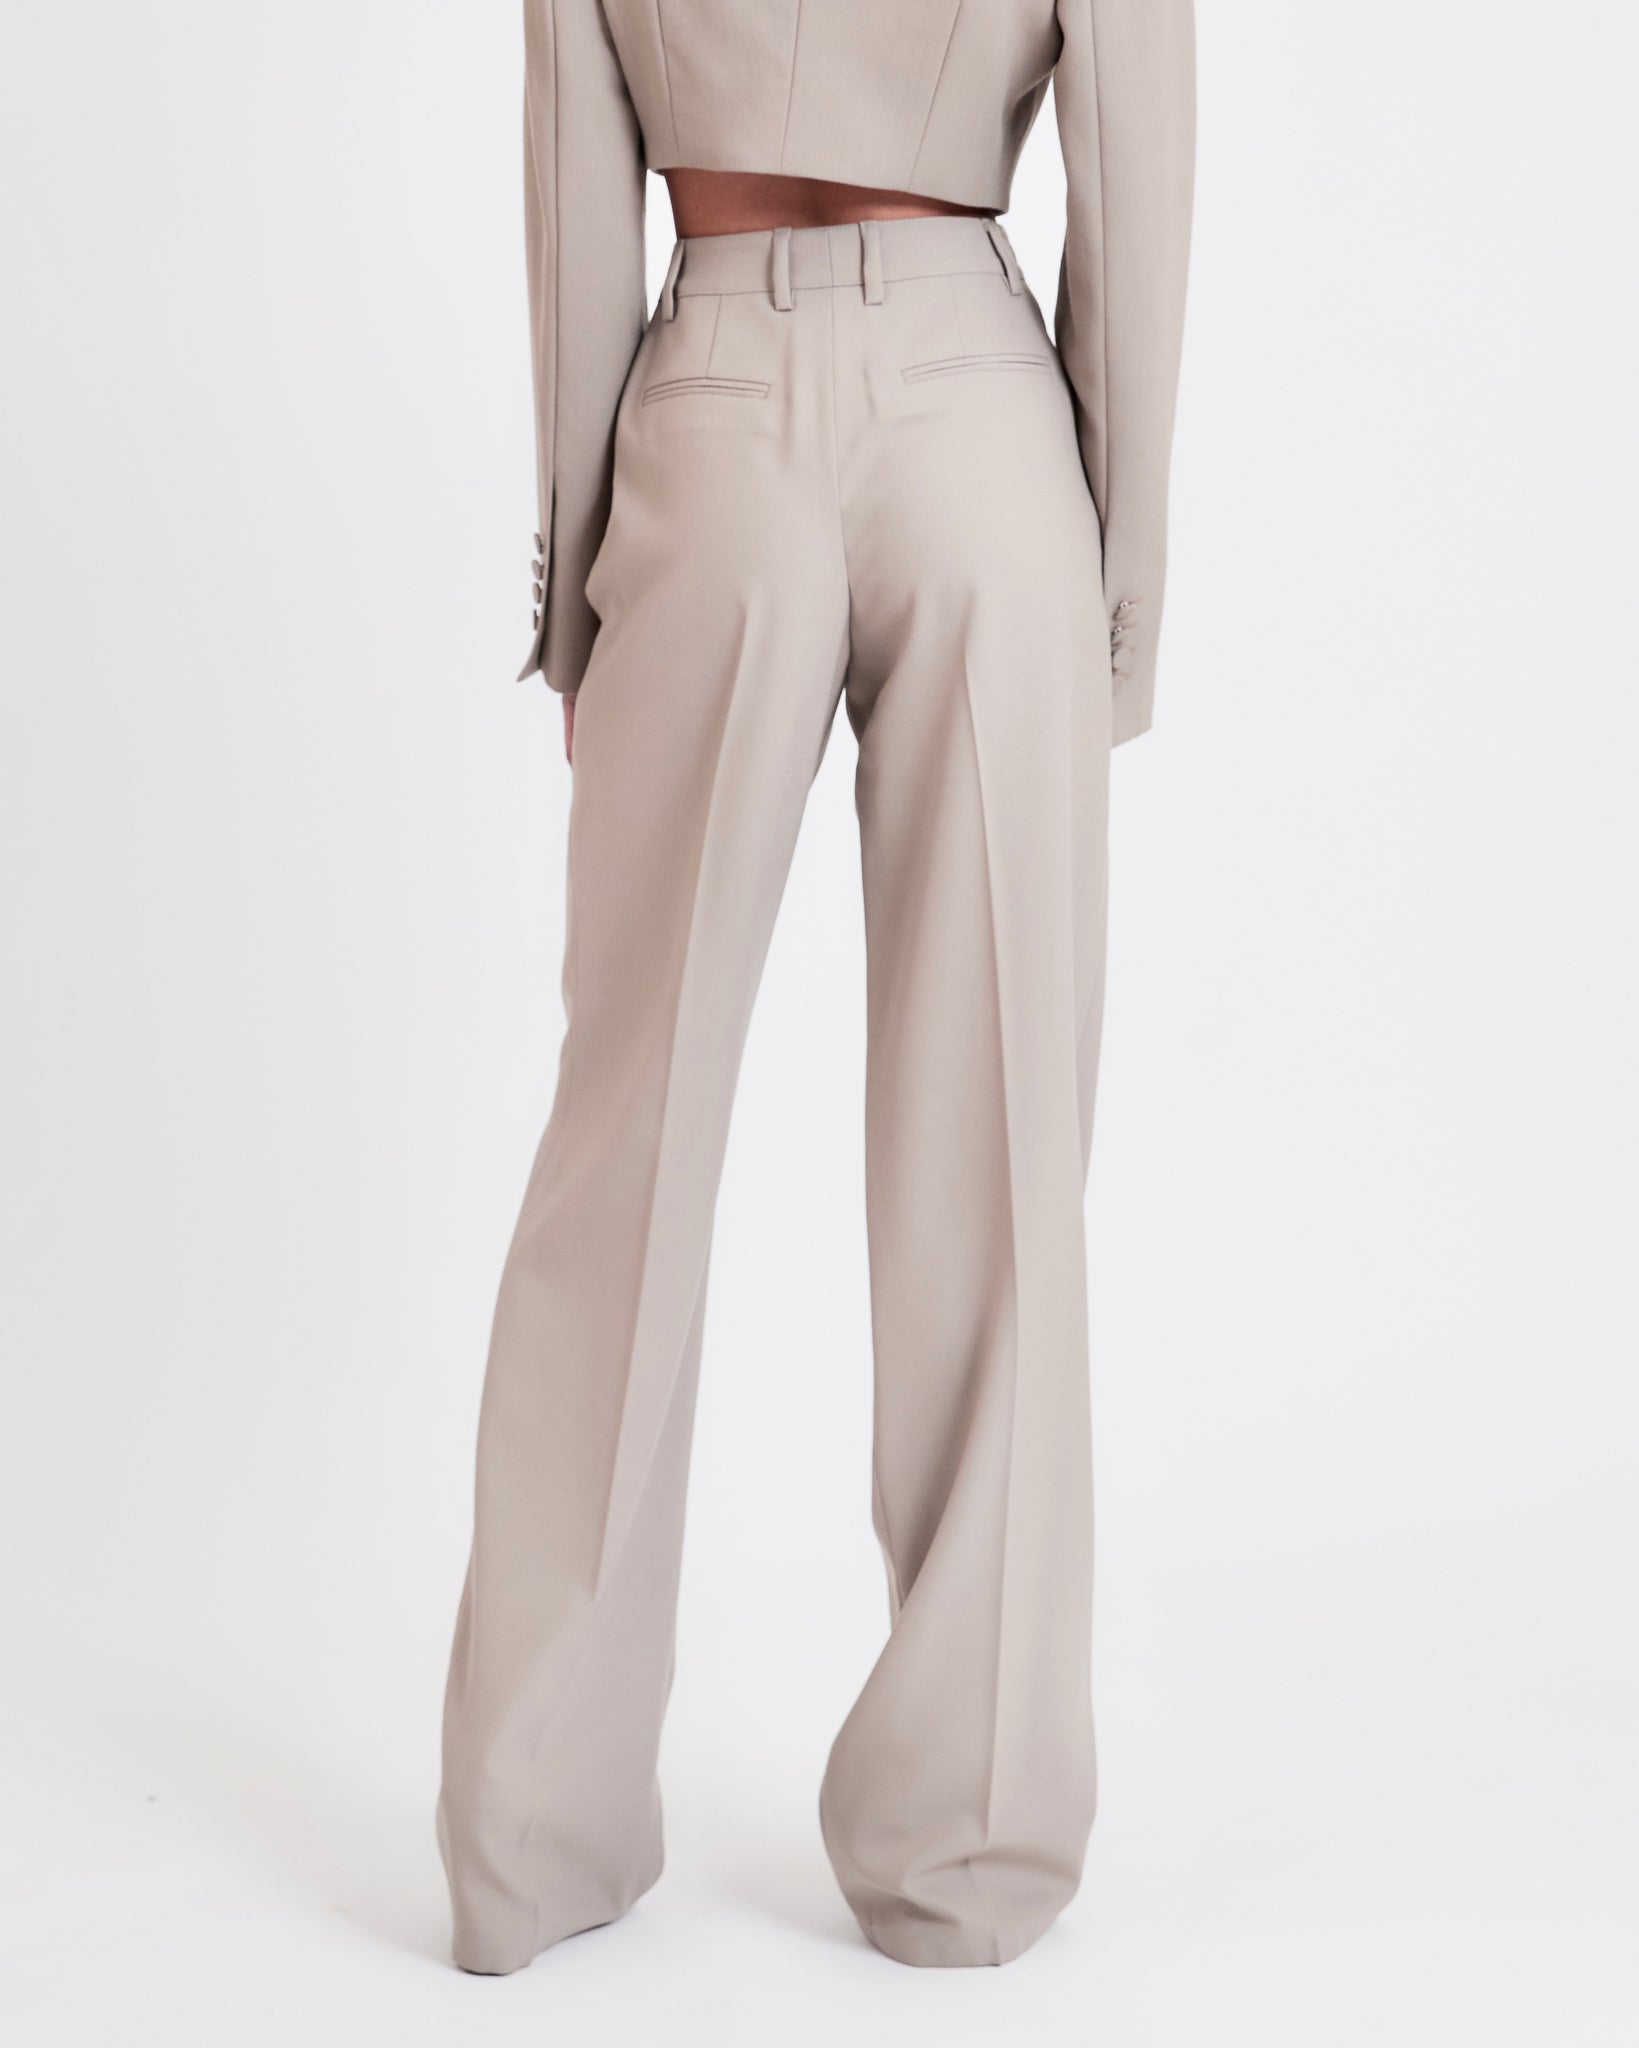 O'CONNOR WIDE-LEG TAILORED PANTS - FINAL SALE